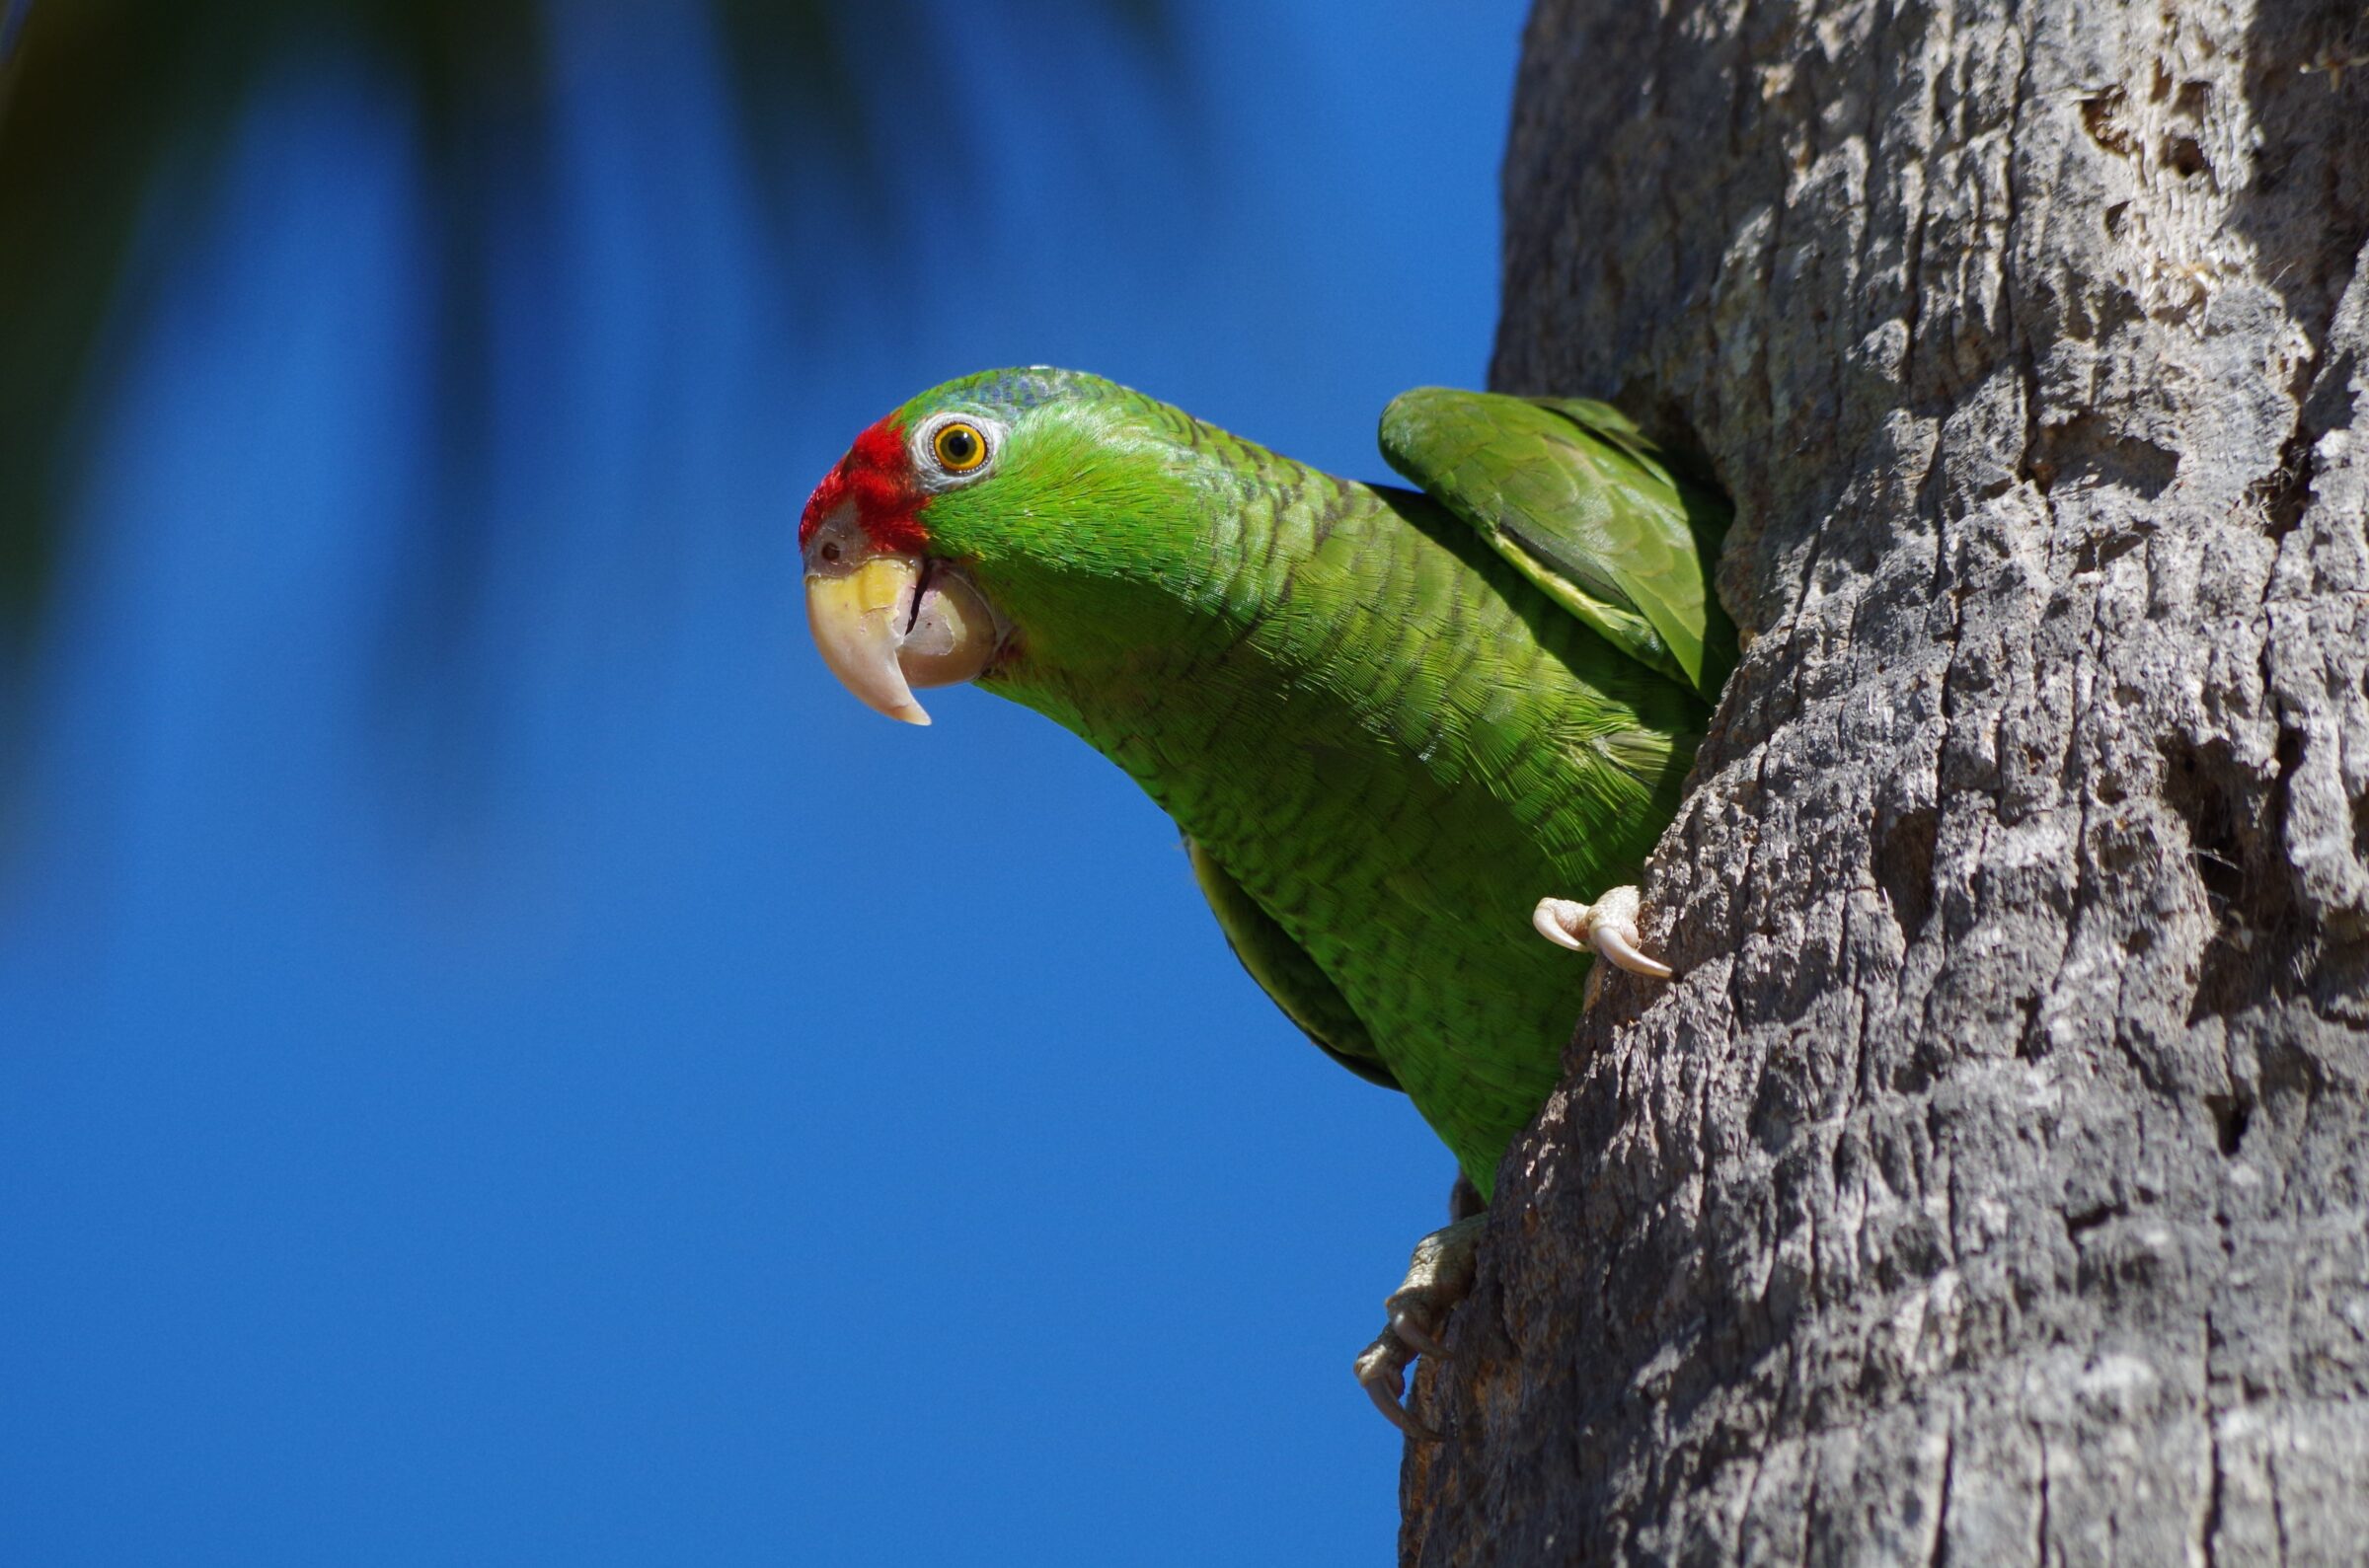 A green parrot sitting in a tree